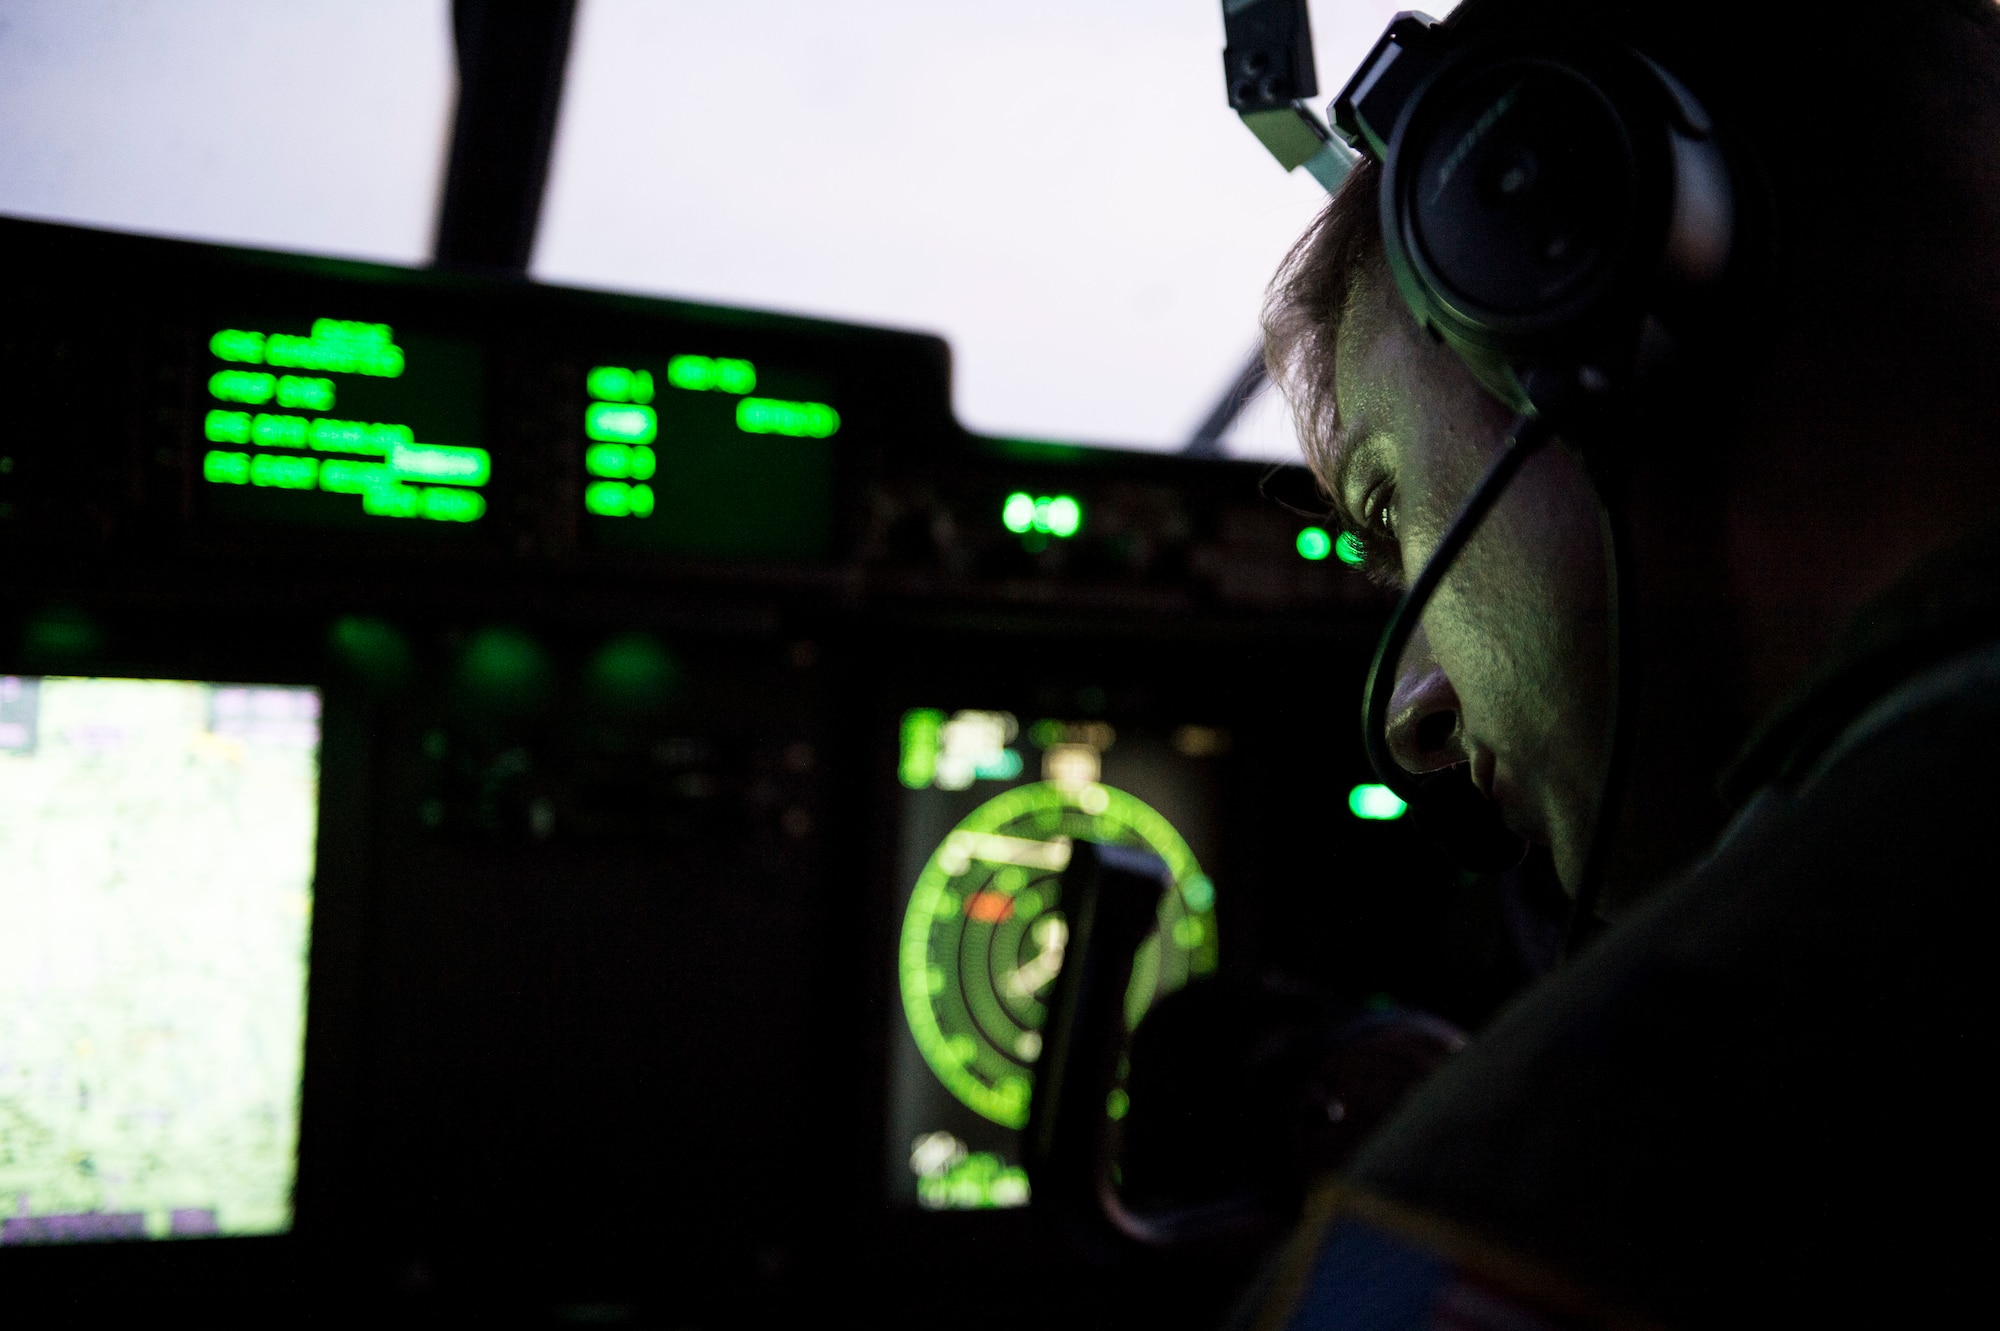 U.S. Air Force Capt. Pete Wolber, 37th Airlift Squadron C-130J Super Hercules pilot, operates the control panel of his aircraft during a training flight over Poland Aug. 2, 2018. Aircraft and Airmen from the 86th Airlift Wing have been conducting aviation detachment rotations since 2012. (U.S. Air Force photo by Senior Airman Joshua Magbanua)